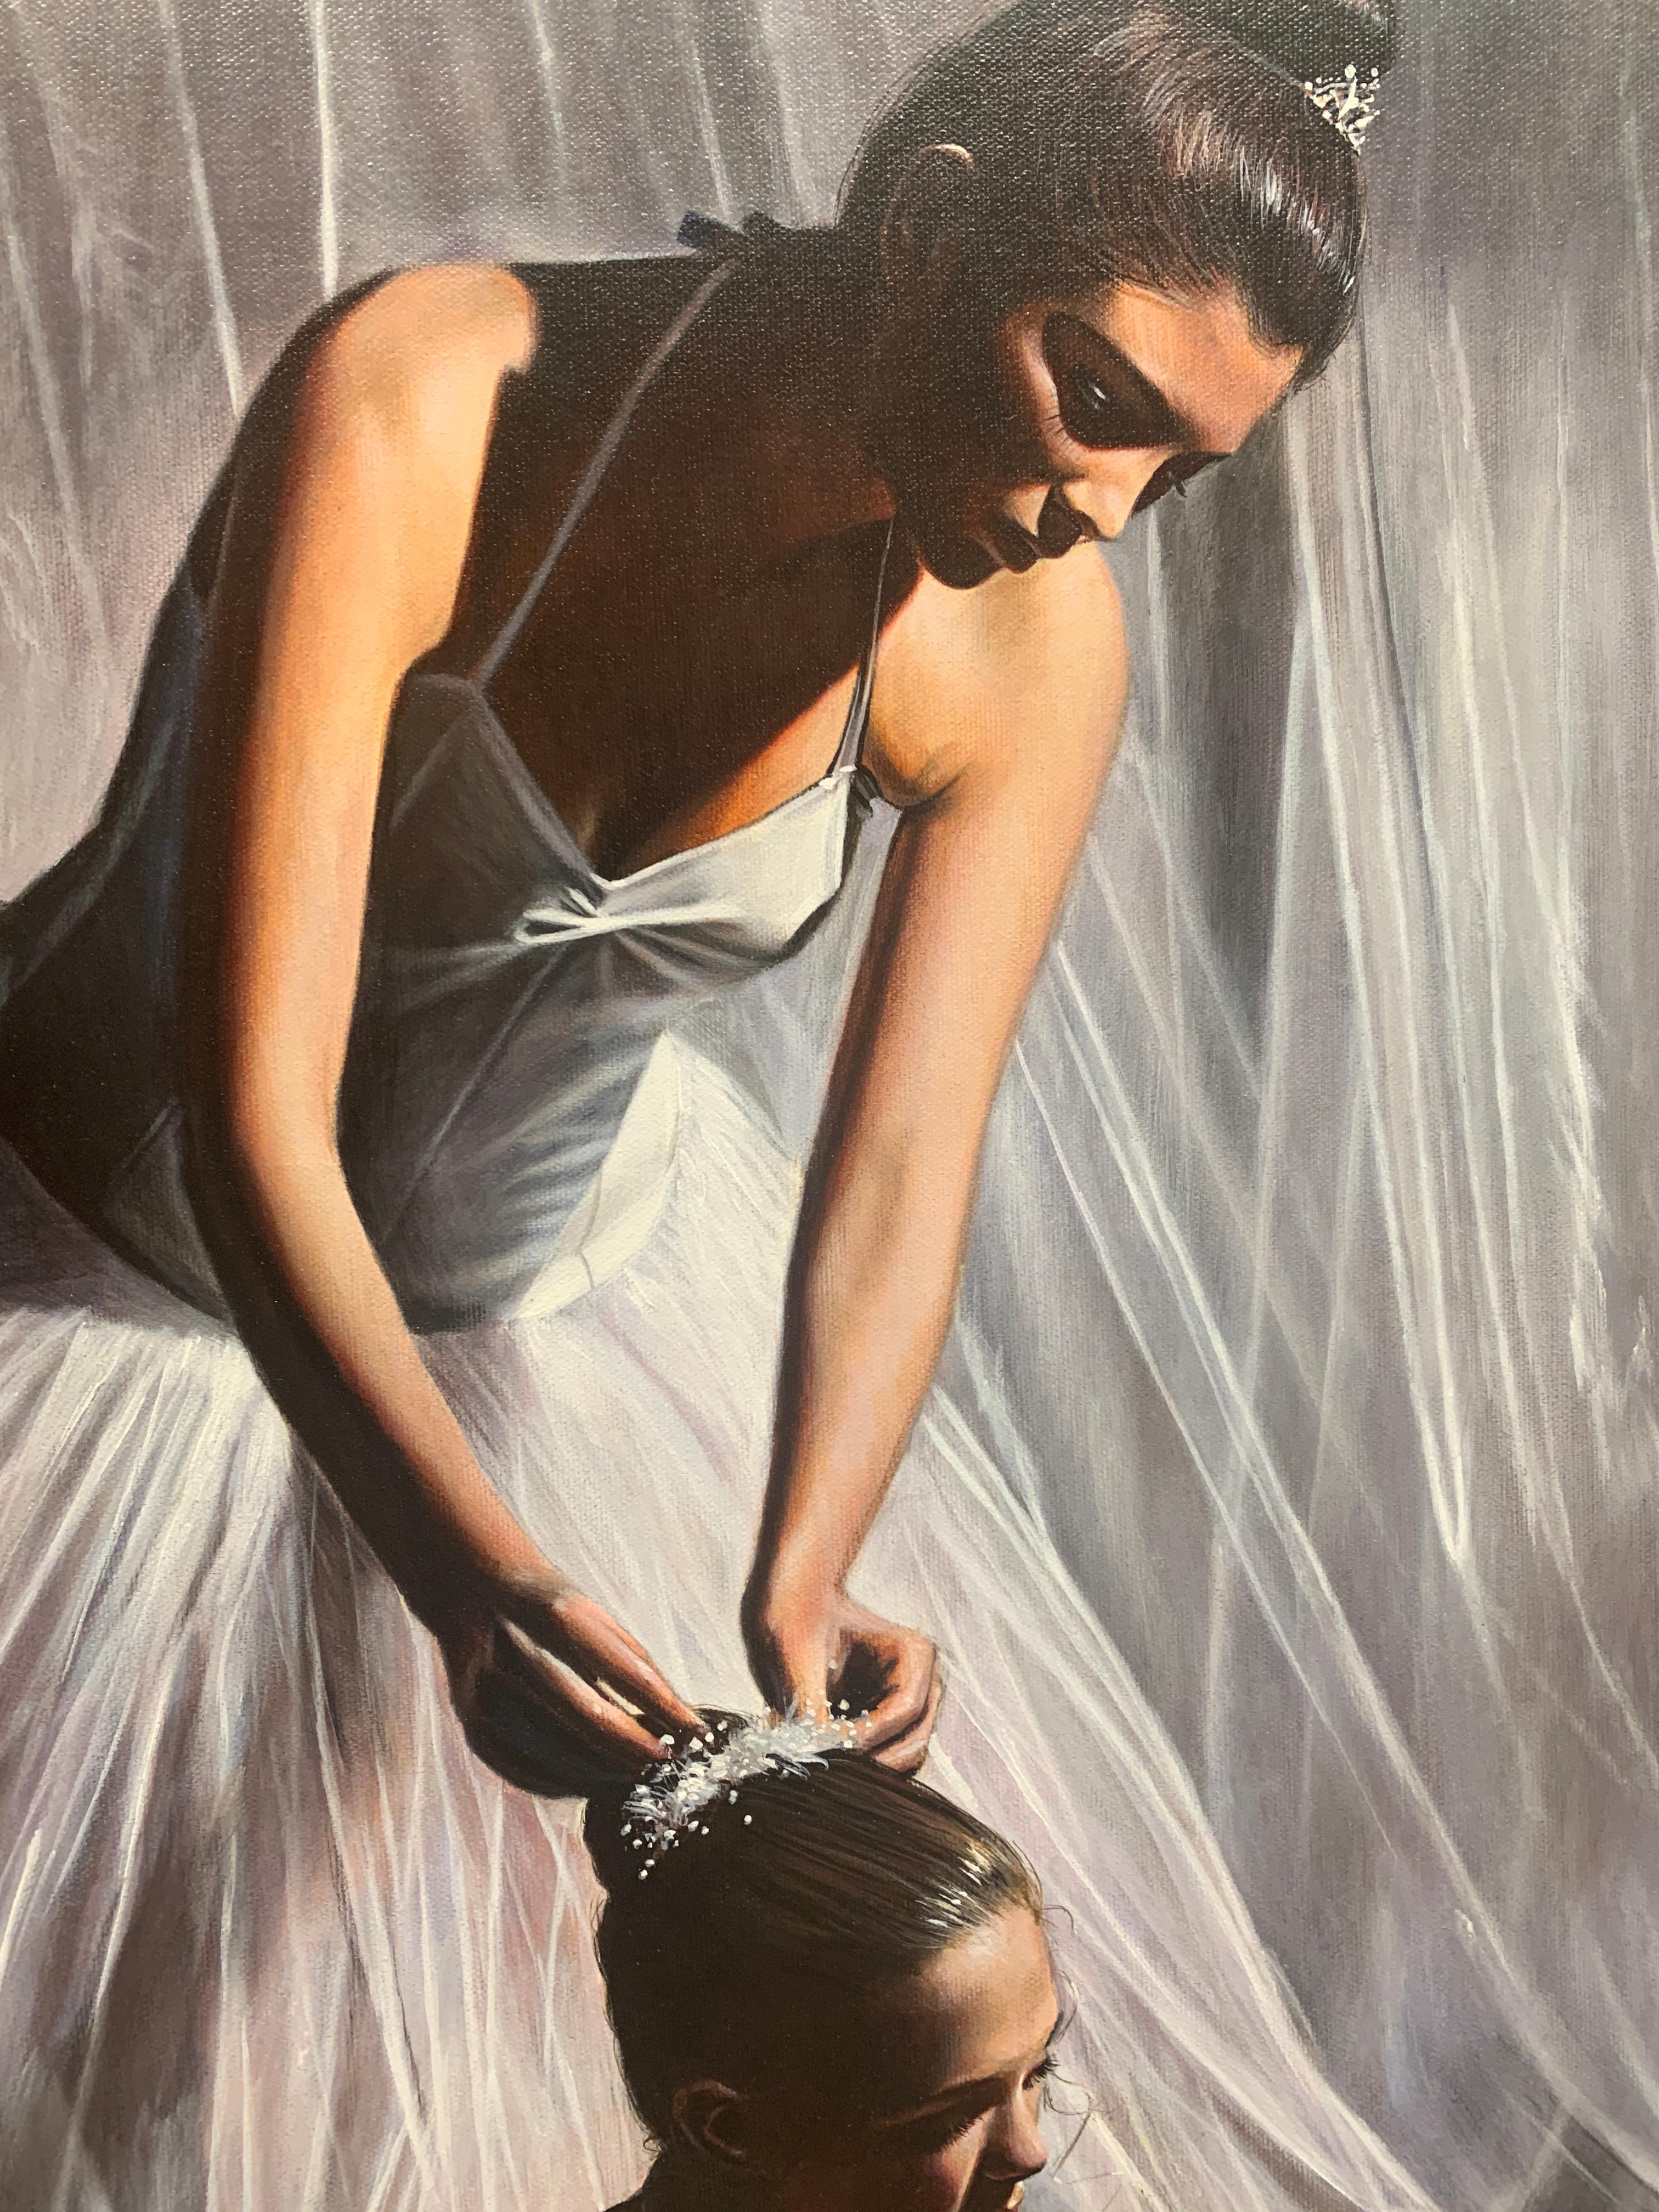 Finishing Touches - Realist Painting by Rob Hefferan